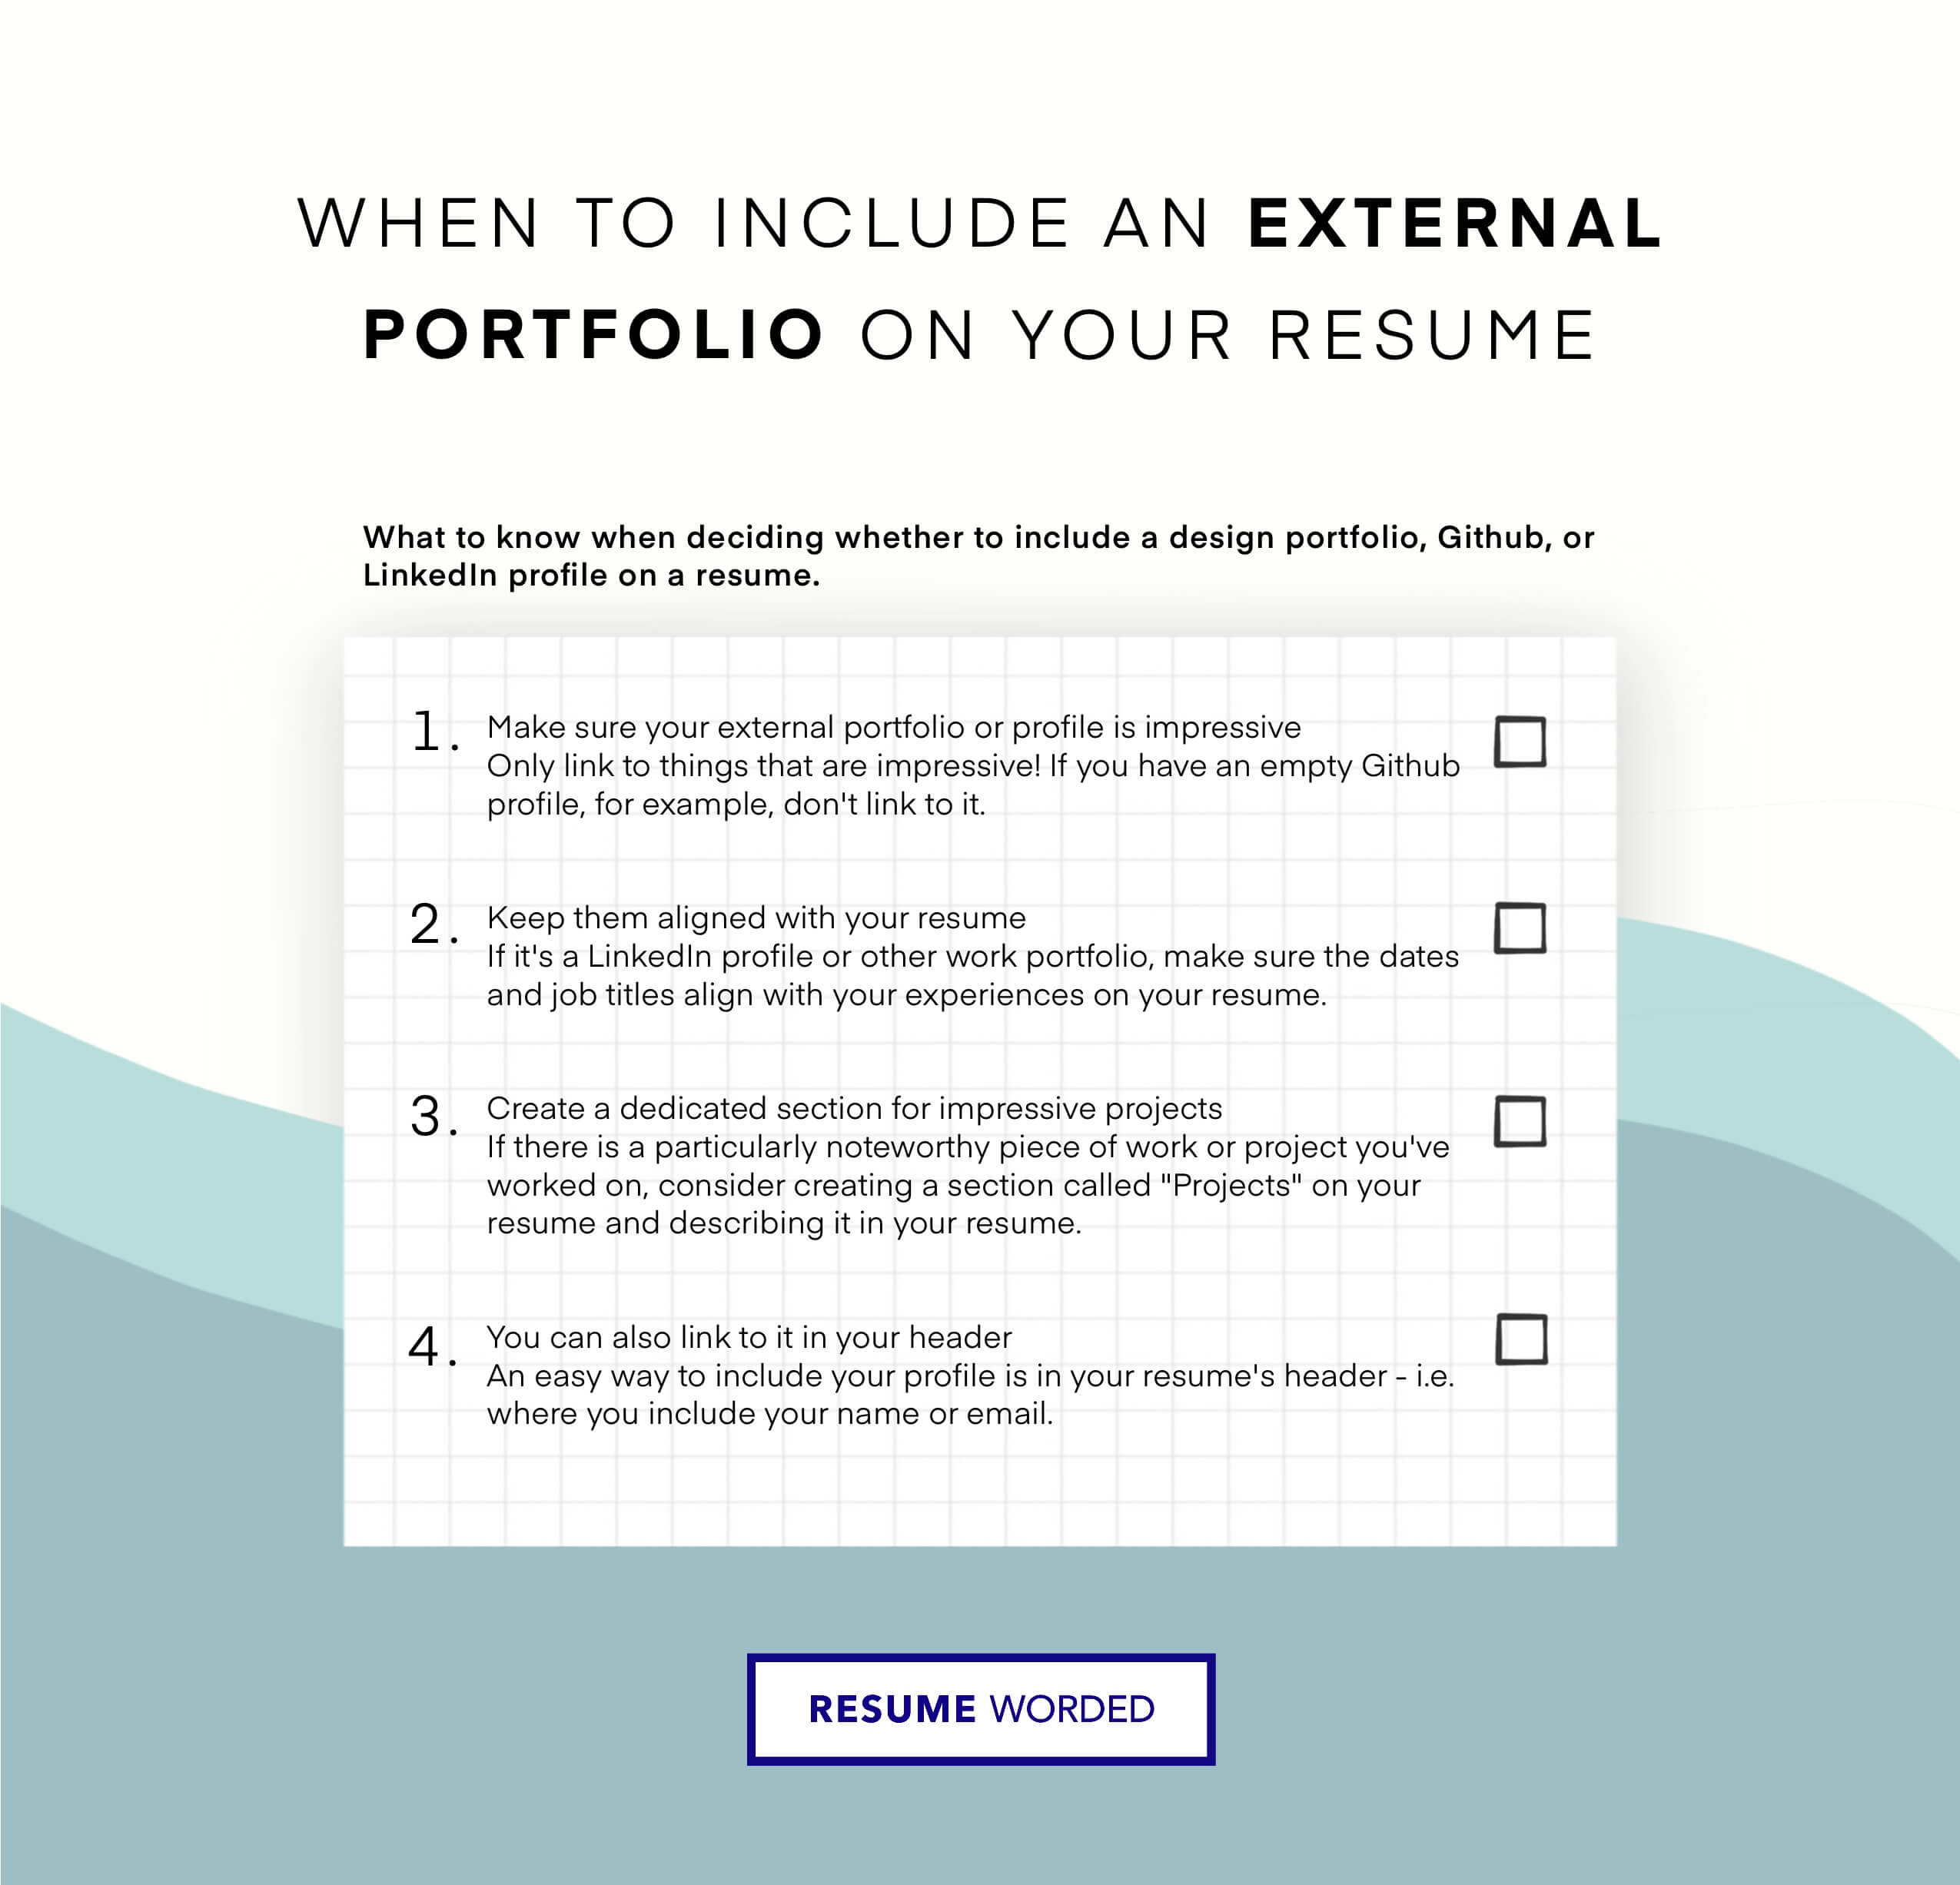 Broaden your portfolio with relevant personal projects - Entry-Level UX Researcher CV